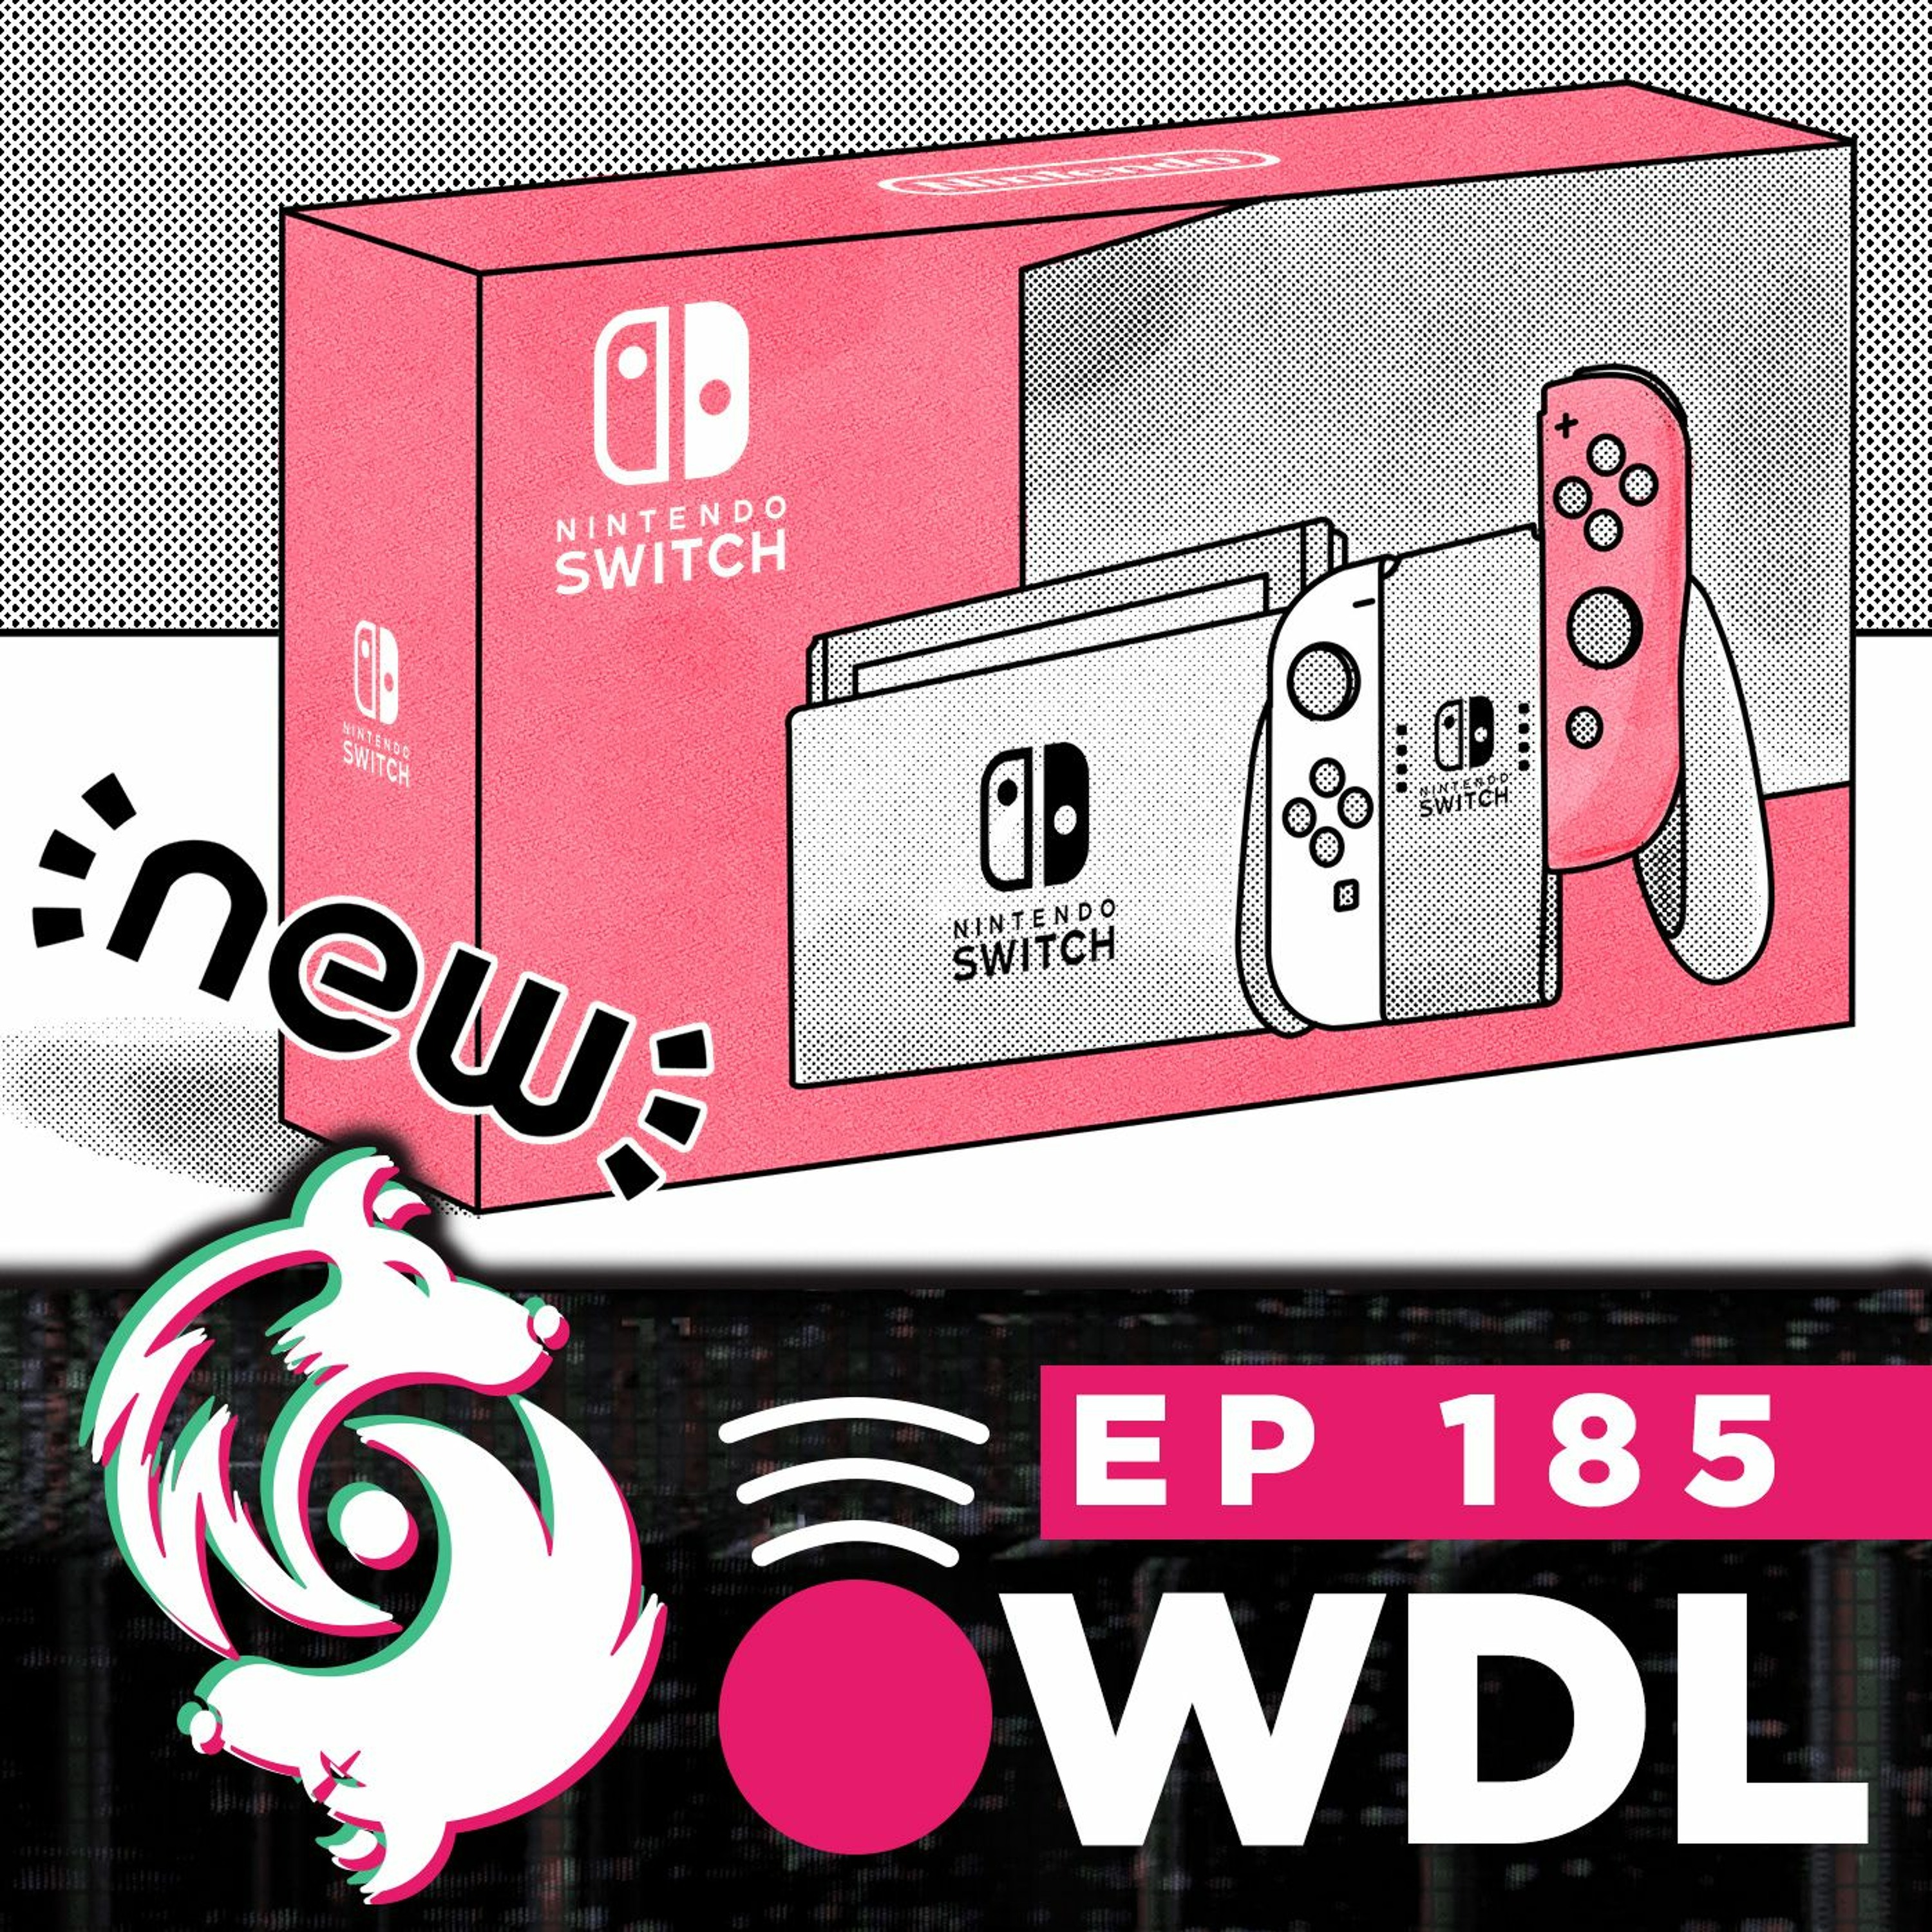 That new original Nintendo Switch revision is closer than we think - WDL Ep 185